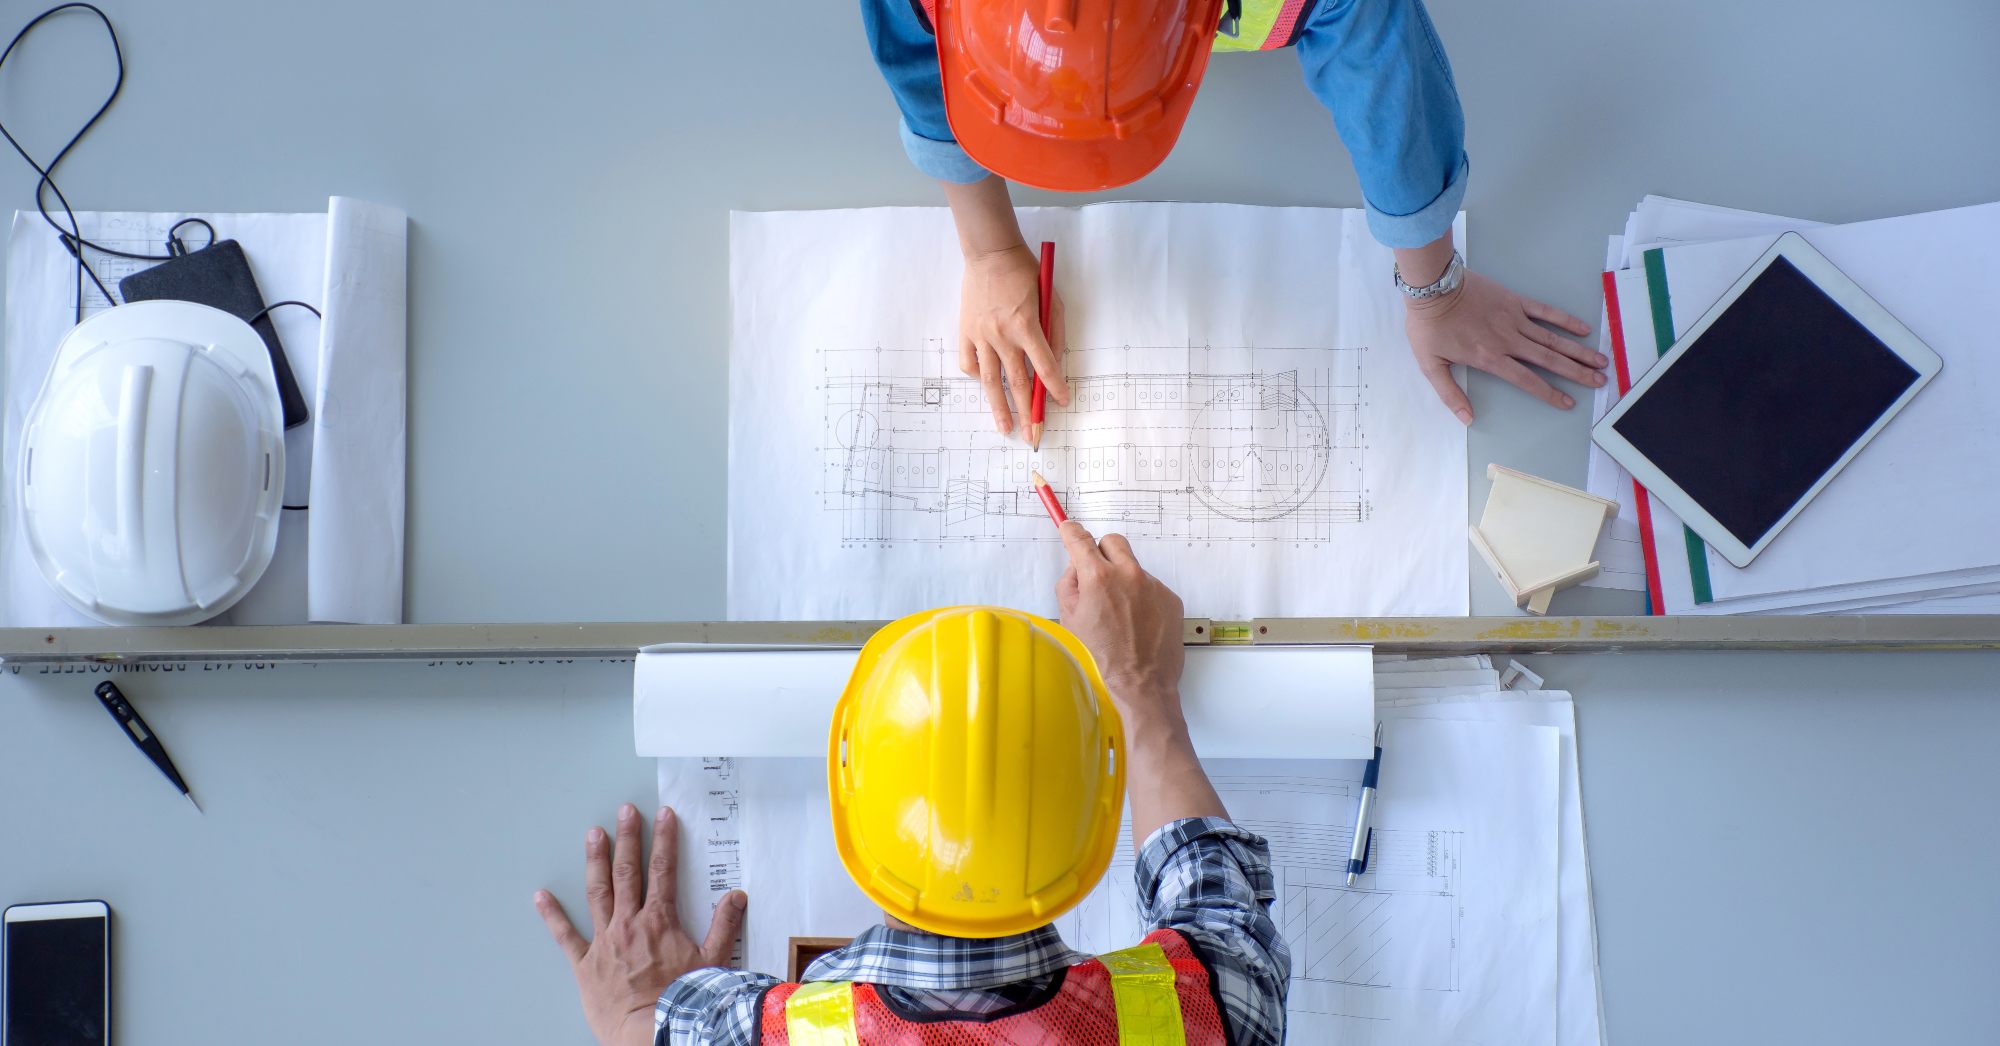 Opinion: Your Construction Safety Program Can’t Be Effective Without a Good Work Plan